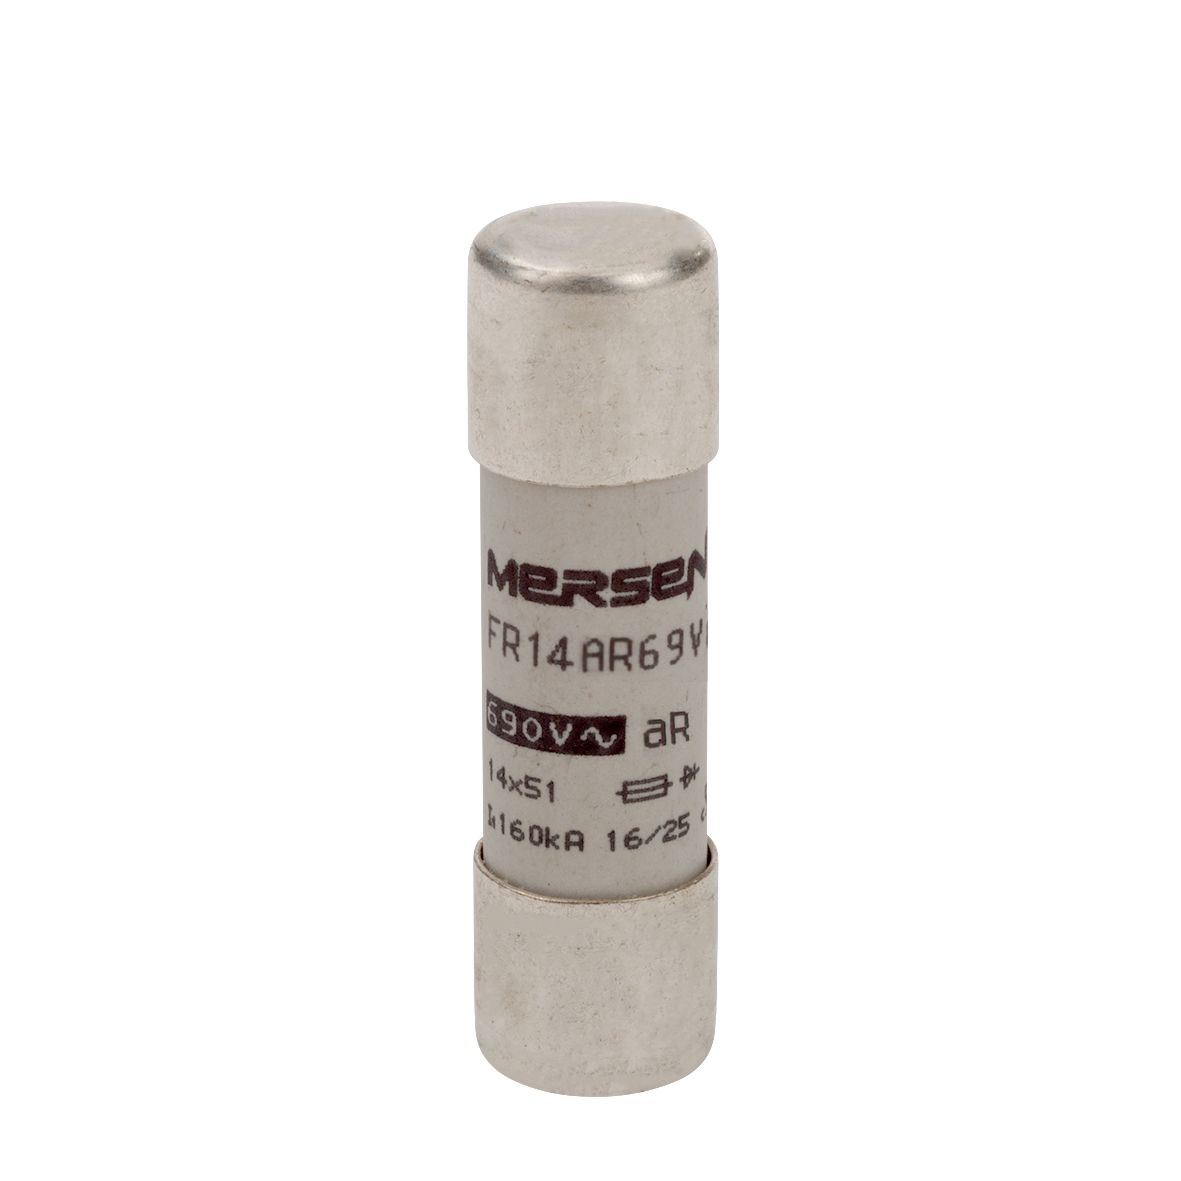 J1027326 - Cylindrical fuse-link aR 690VAC 14x51, 8A, without indicator